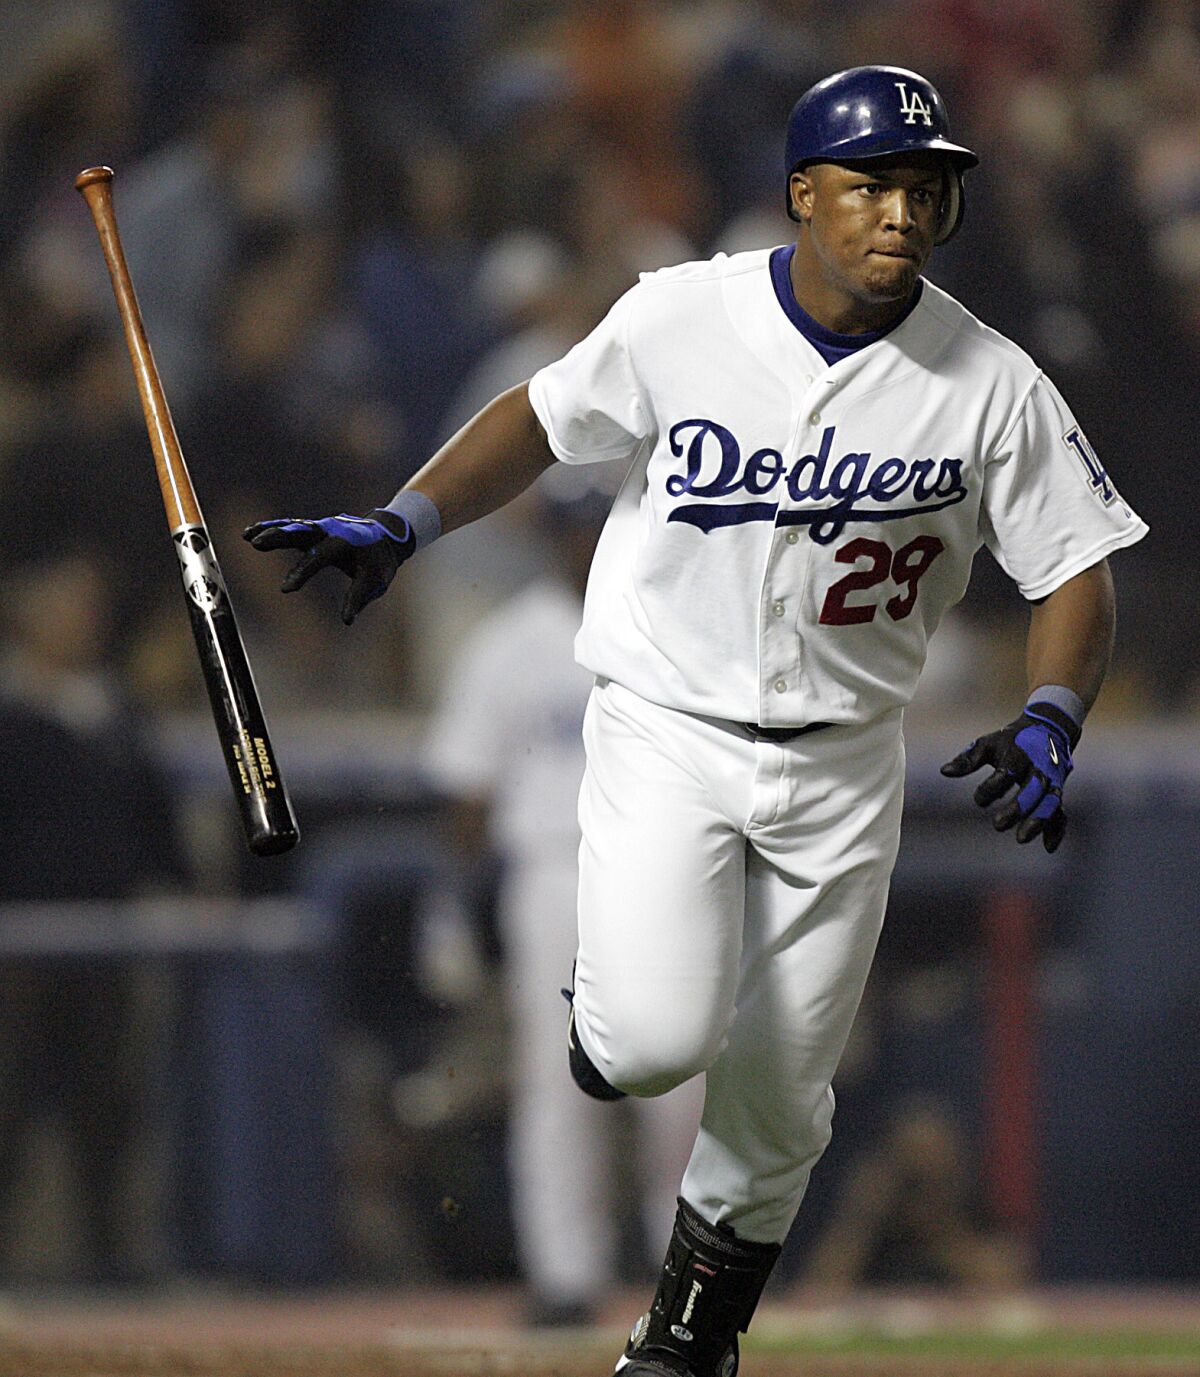 Dodgers' Adrian Beltre flips the bat after hitting a grand slam against the Colorado Rockies on Sept. 27, 2004